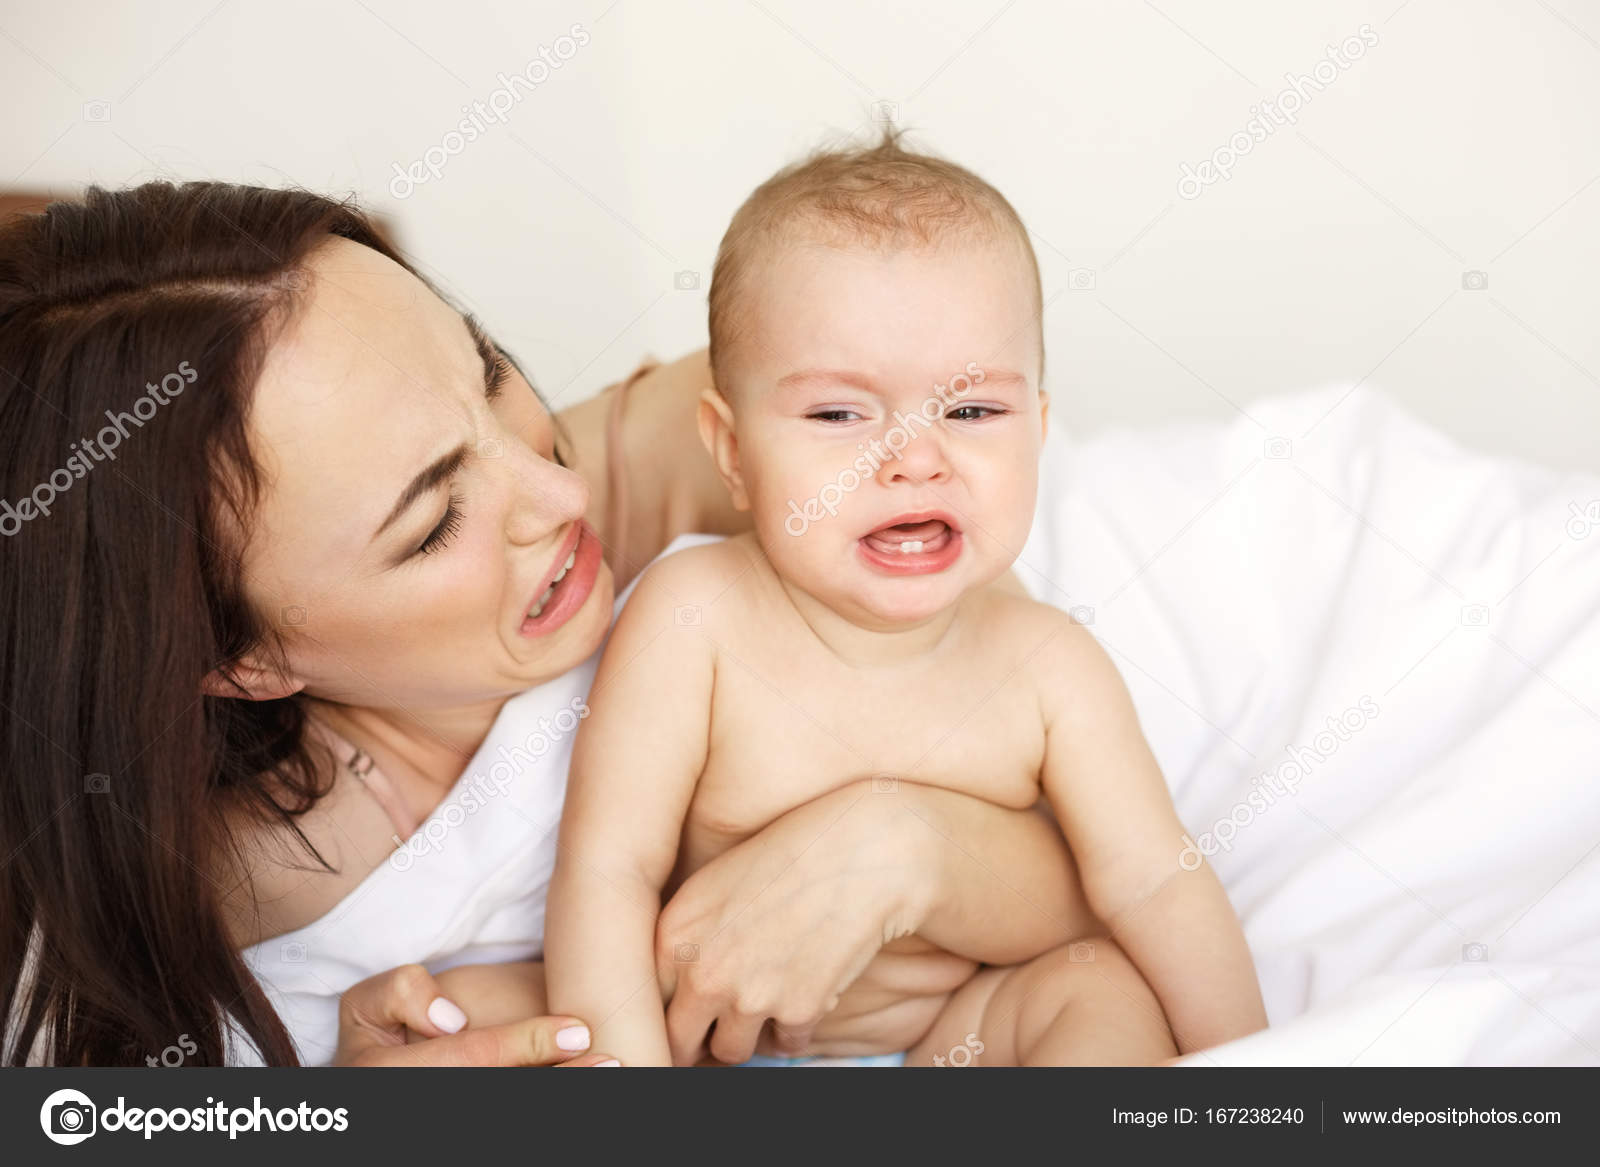 Funny Caption For Crying Baby Cool Attitude Captions